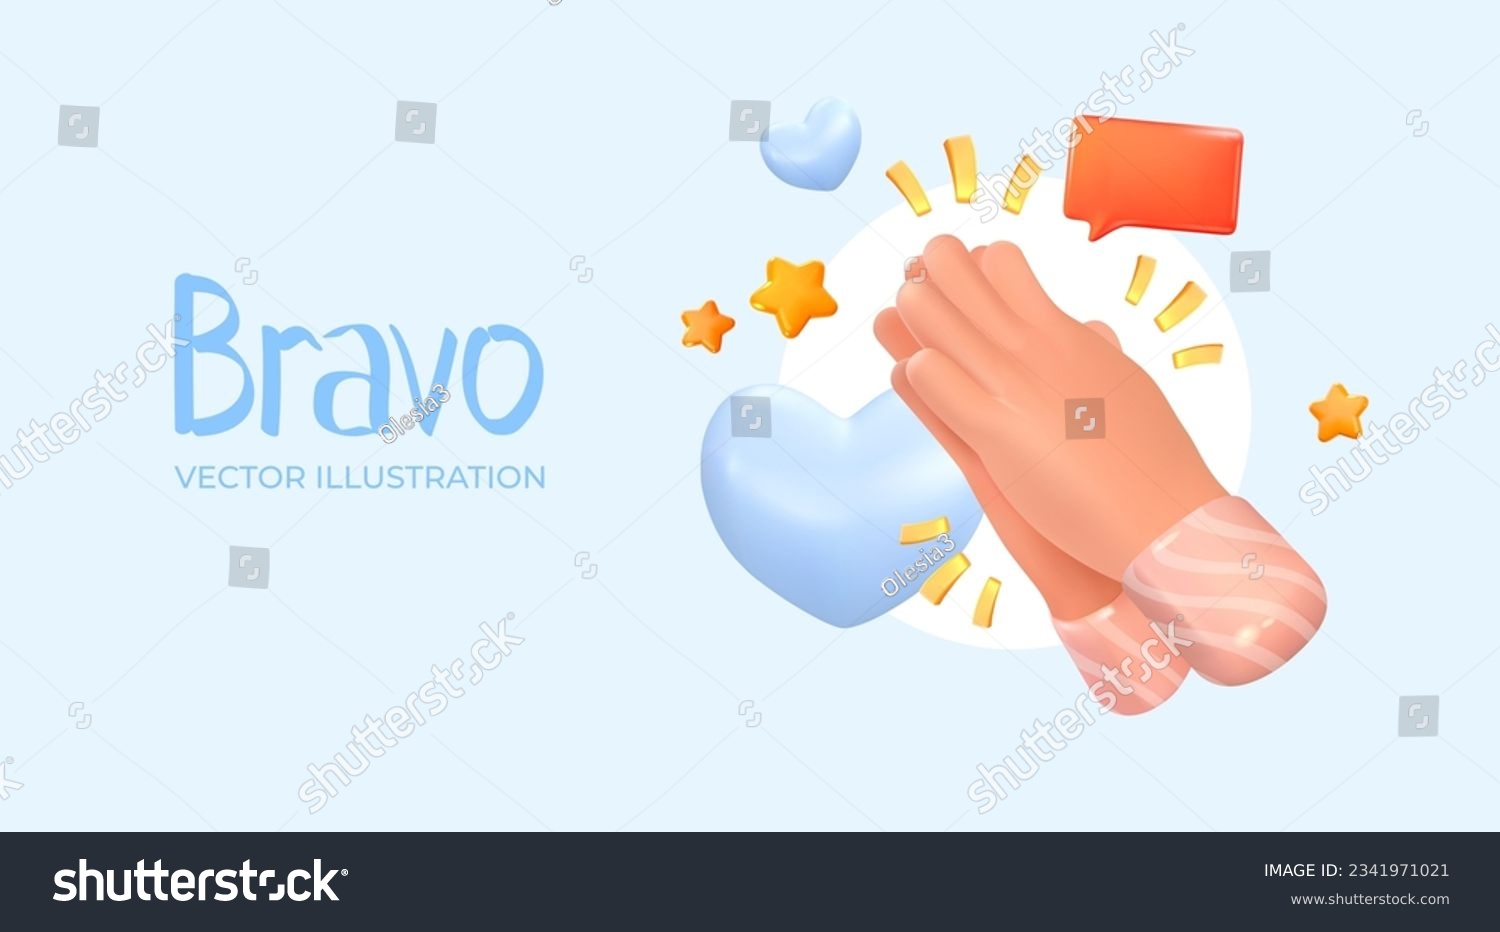 Applause. Hands applauding. In 3d style. Vector illustration #2341971021